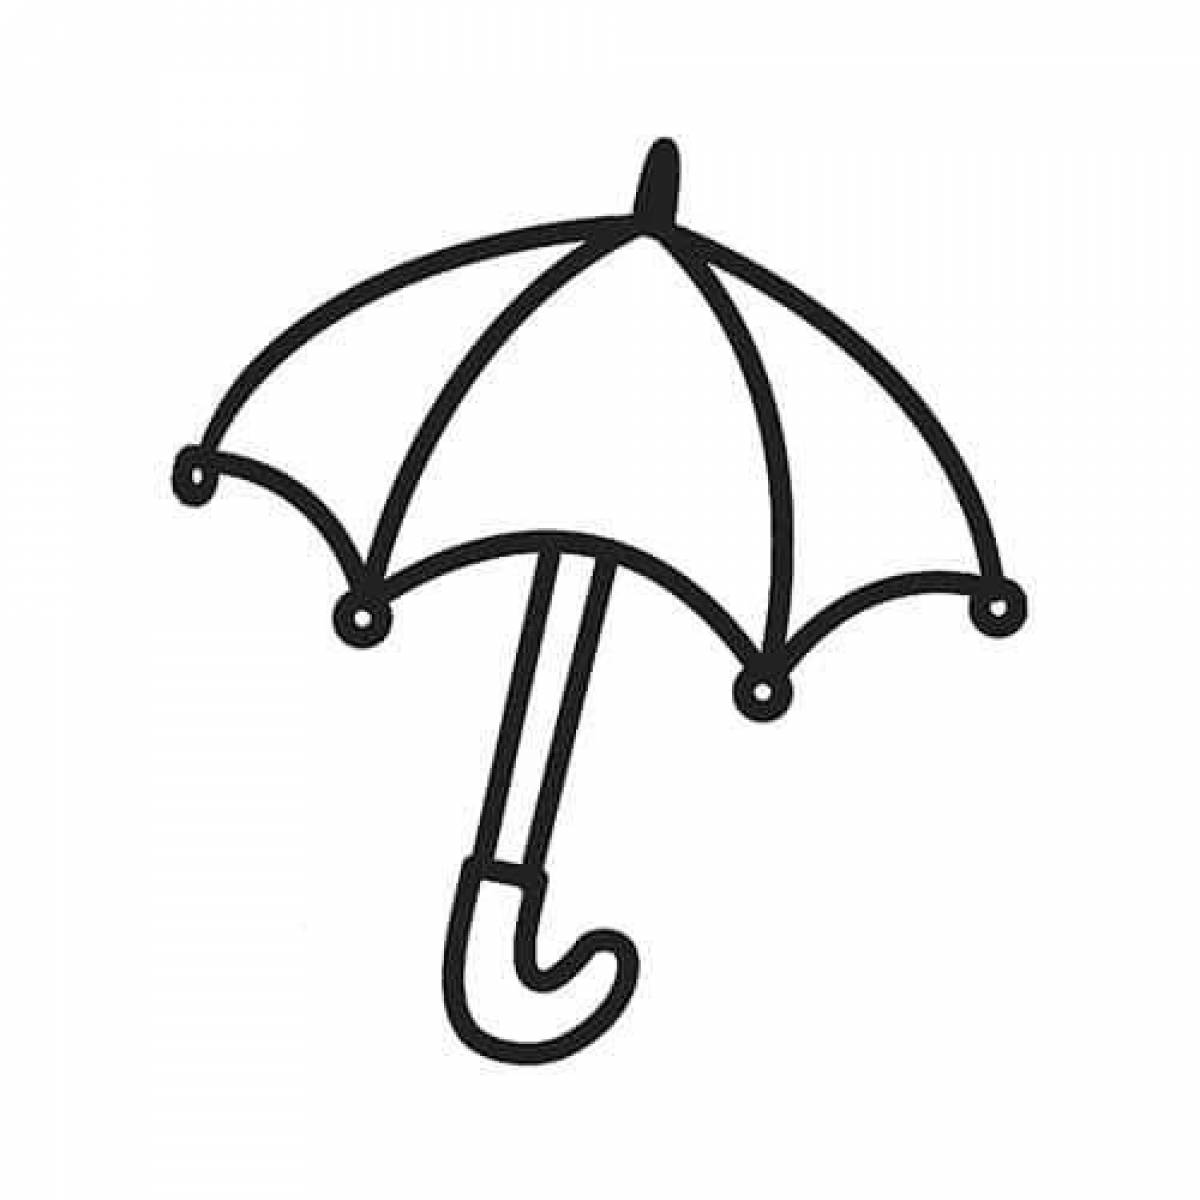 Colorful and colorful and fun umbrella coloring book for kids